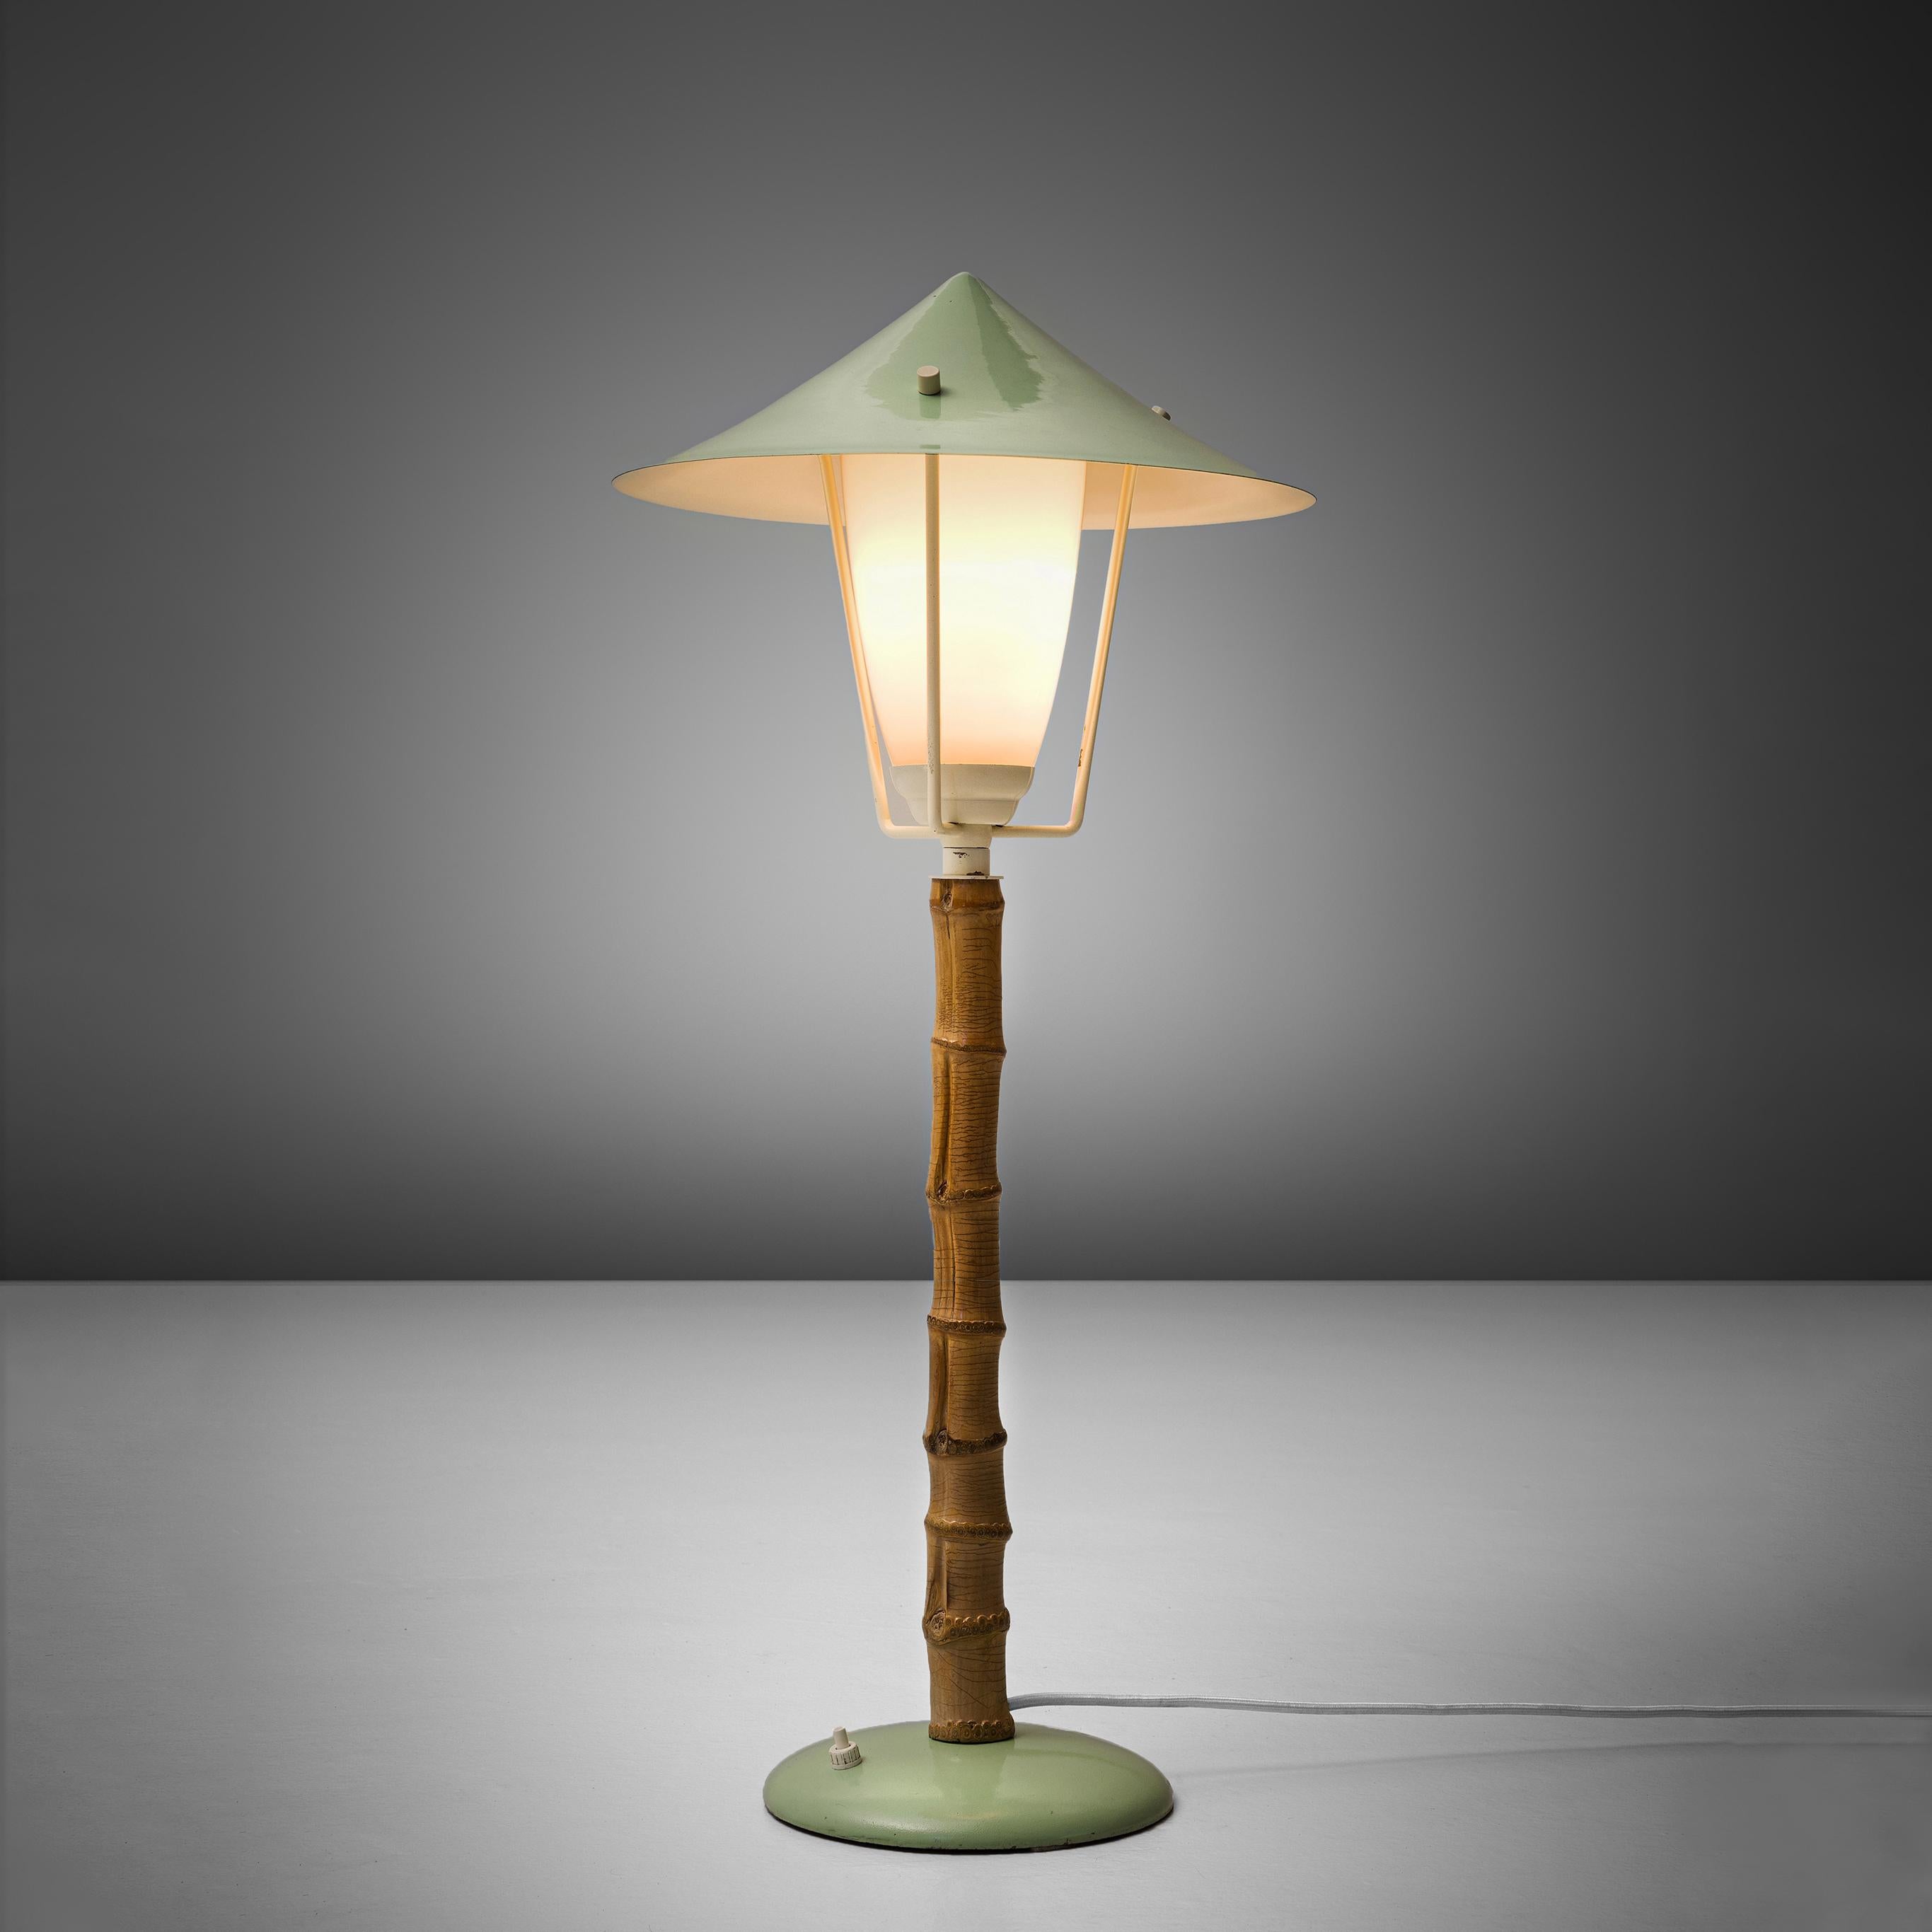 J.T. Kalmar, table lamp, metal, faux-bamboo and glass, Austria, 1950s. 

Frivolous table lamp, or small floor lamp in green coated metal. Overall, this lamp reminds of a tradition garden light. The garden is literally represented in this light by